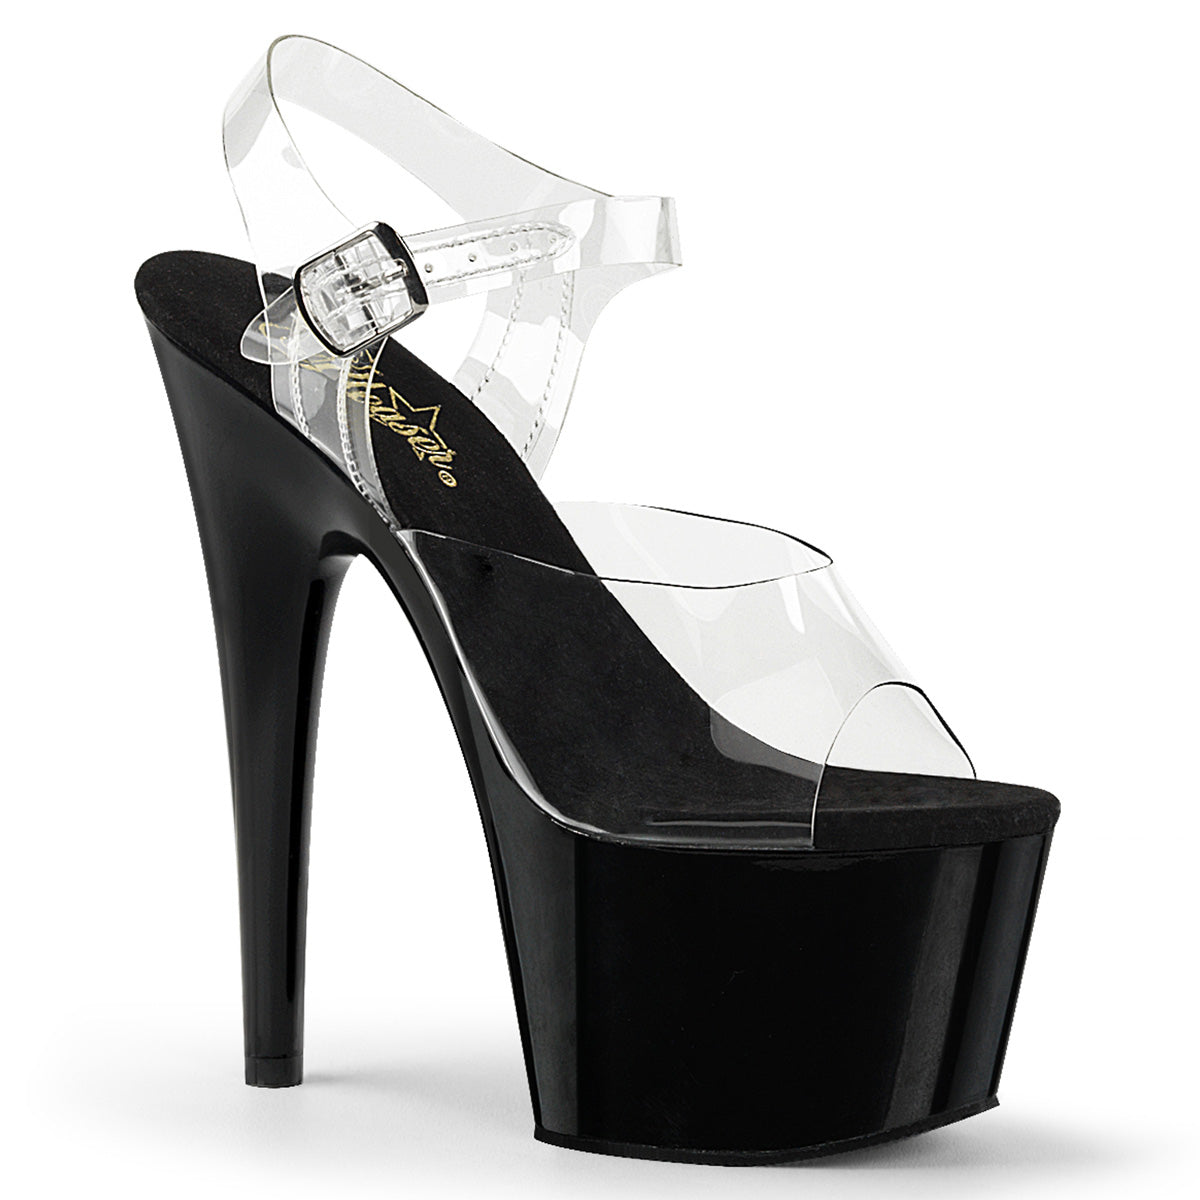 ADORE-708/C/B 7" PLEASER FAST DELIVERY 24-48h